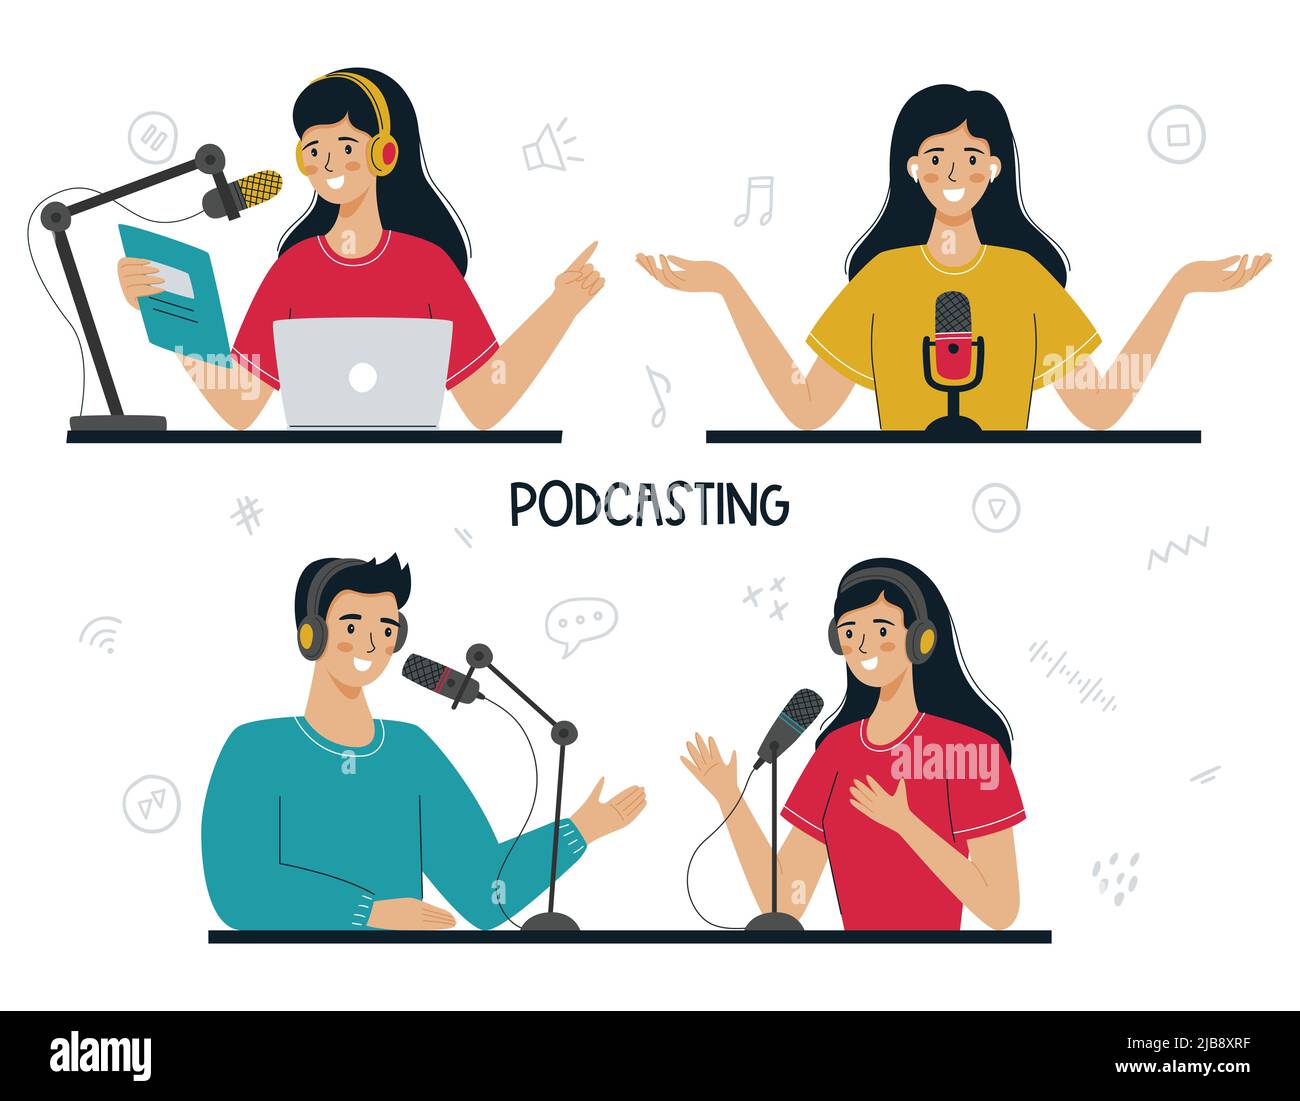 Set of people talking into a microphone, recording a podcast. A woman interviews a man. The girl leads a radio broadcast, an online show, read news. F Stock Vector